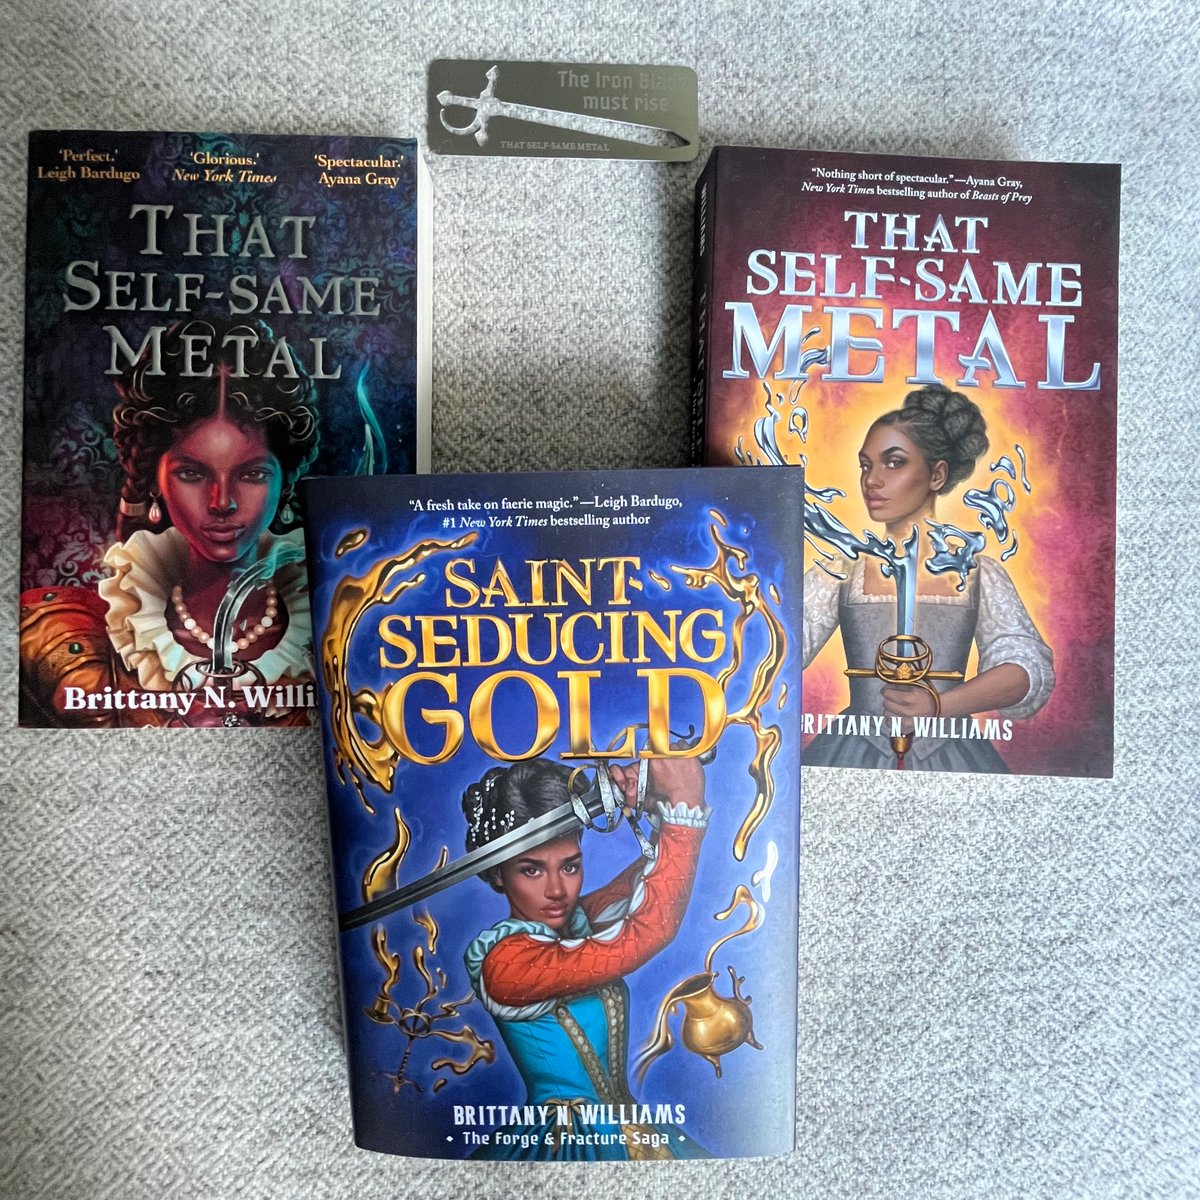 It's #ShakespeareDay and Saint-Seducing Gold's #bookbirthday!! Grab a copy of THAT SELF-SAME METAL and SAINT-SEDUCING GOLD now and celebrate the bard!!!